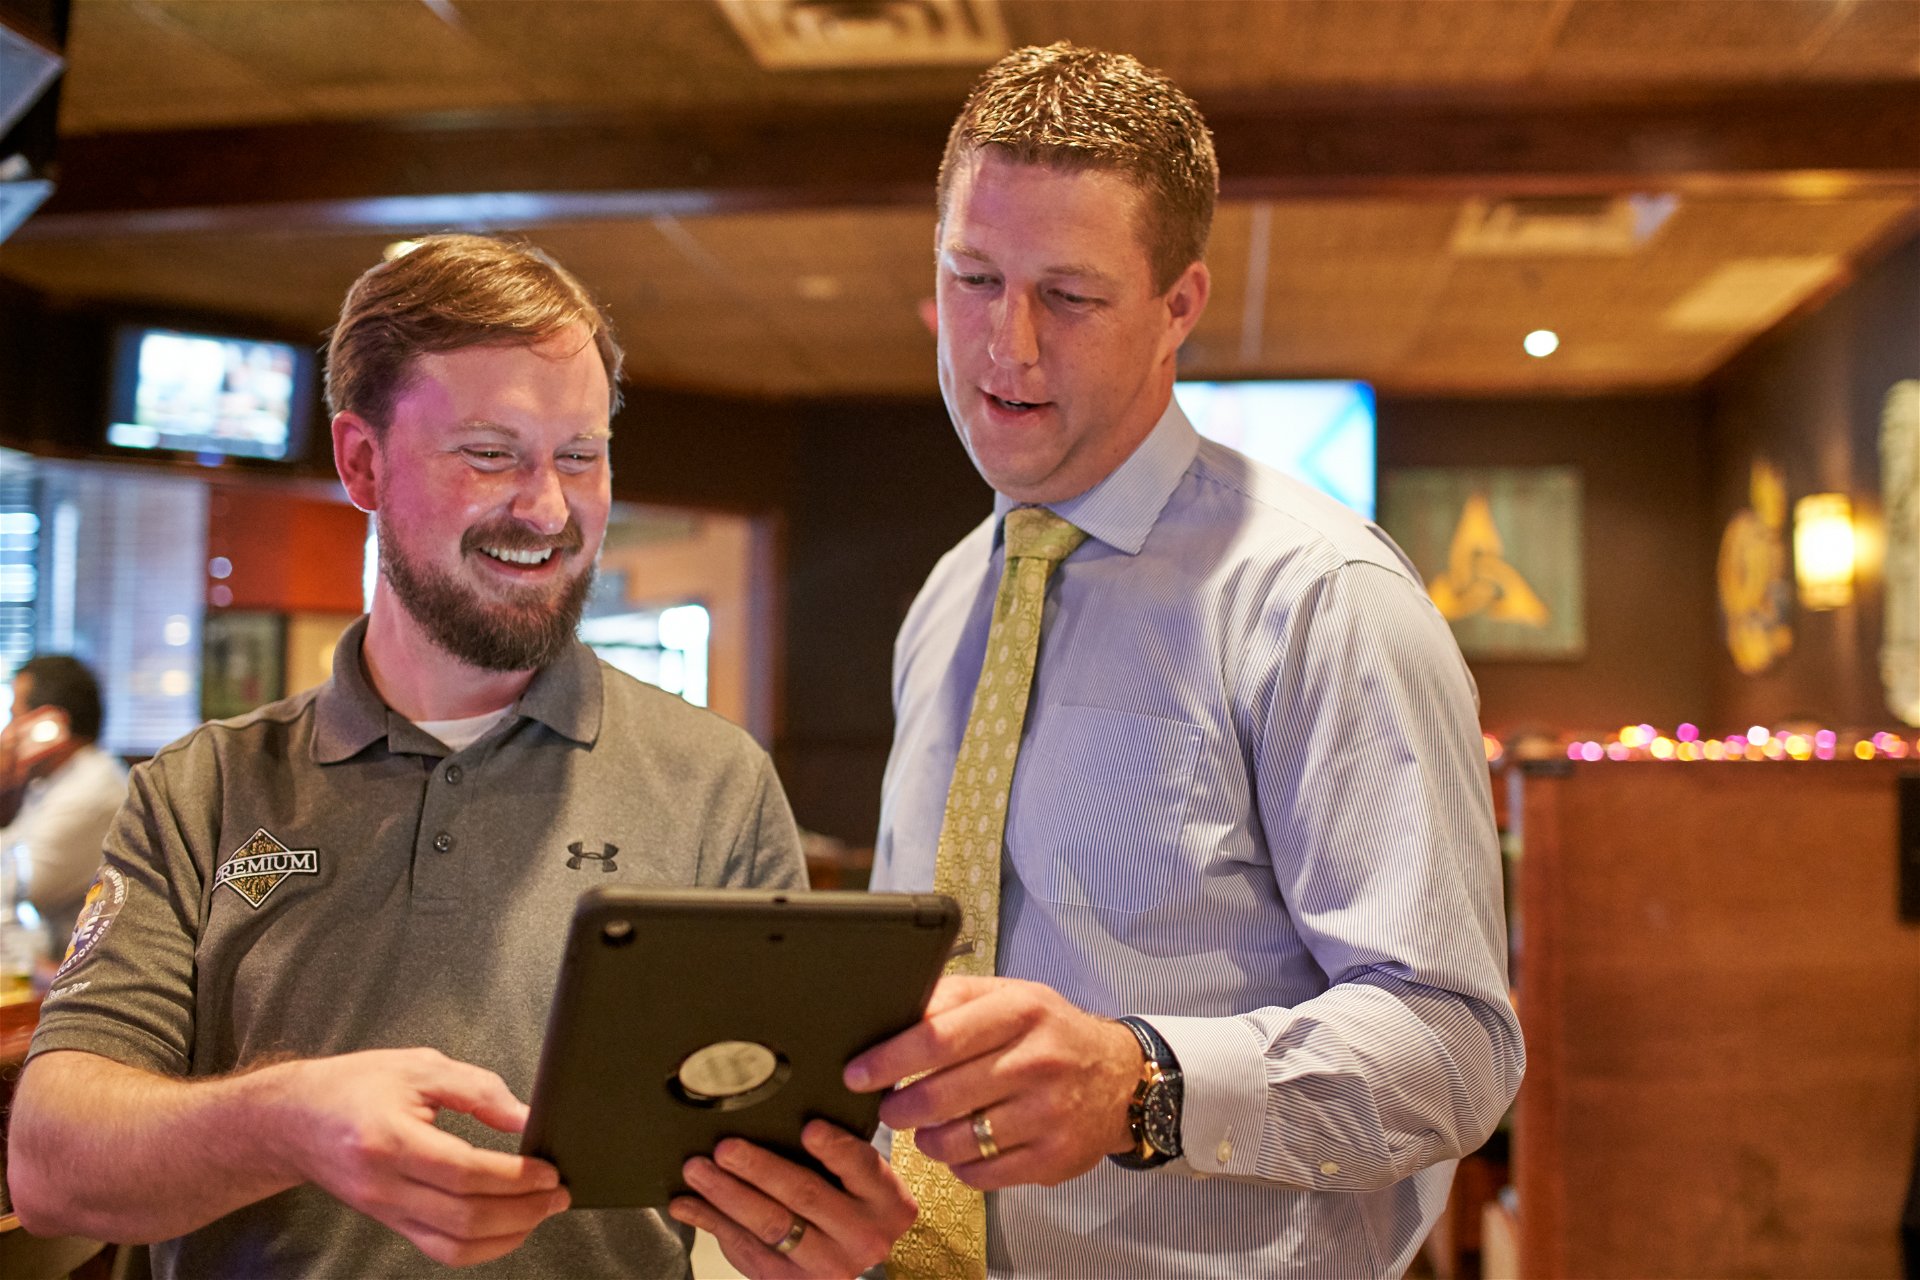 Sales representative looking at an iPad with a business owner in a restaurant